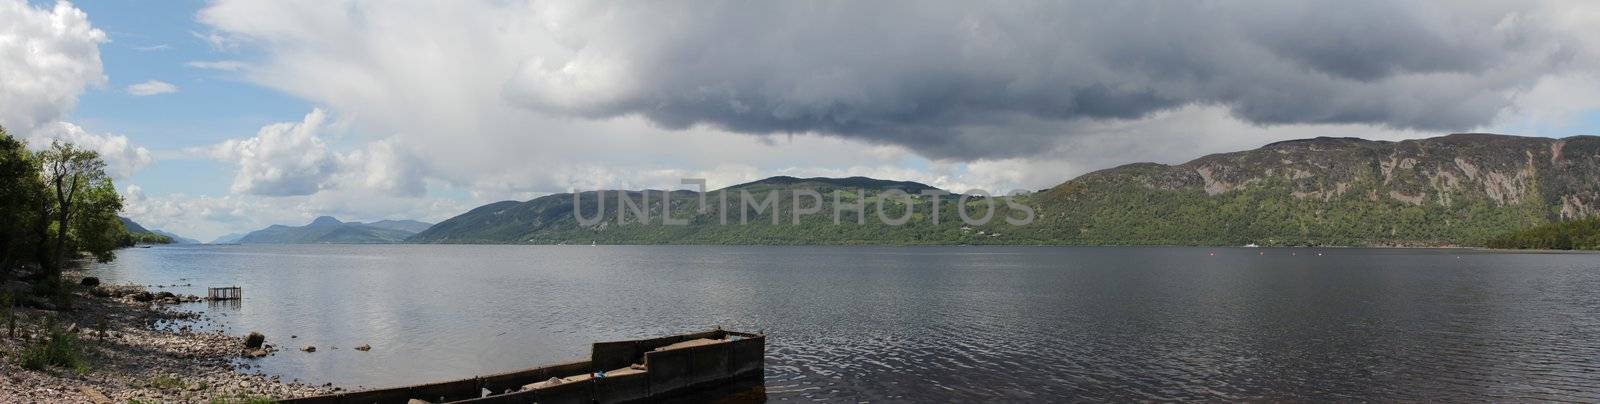 Panoramic photo of the famous Loch Ness, in Scotland. This photo is made attaching together various photos